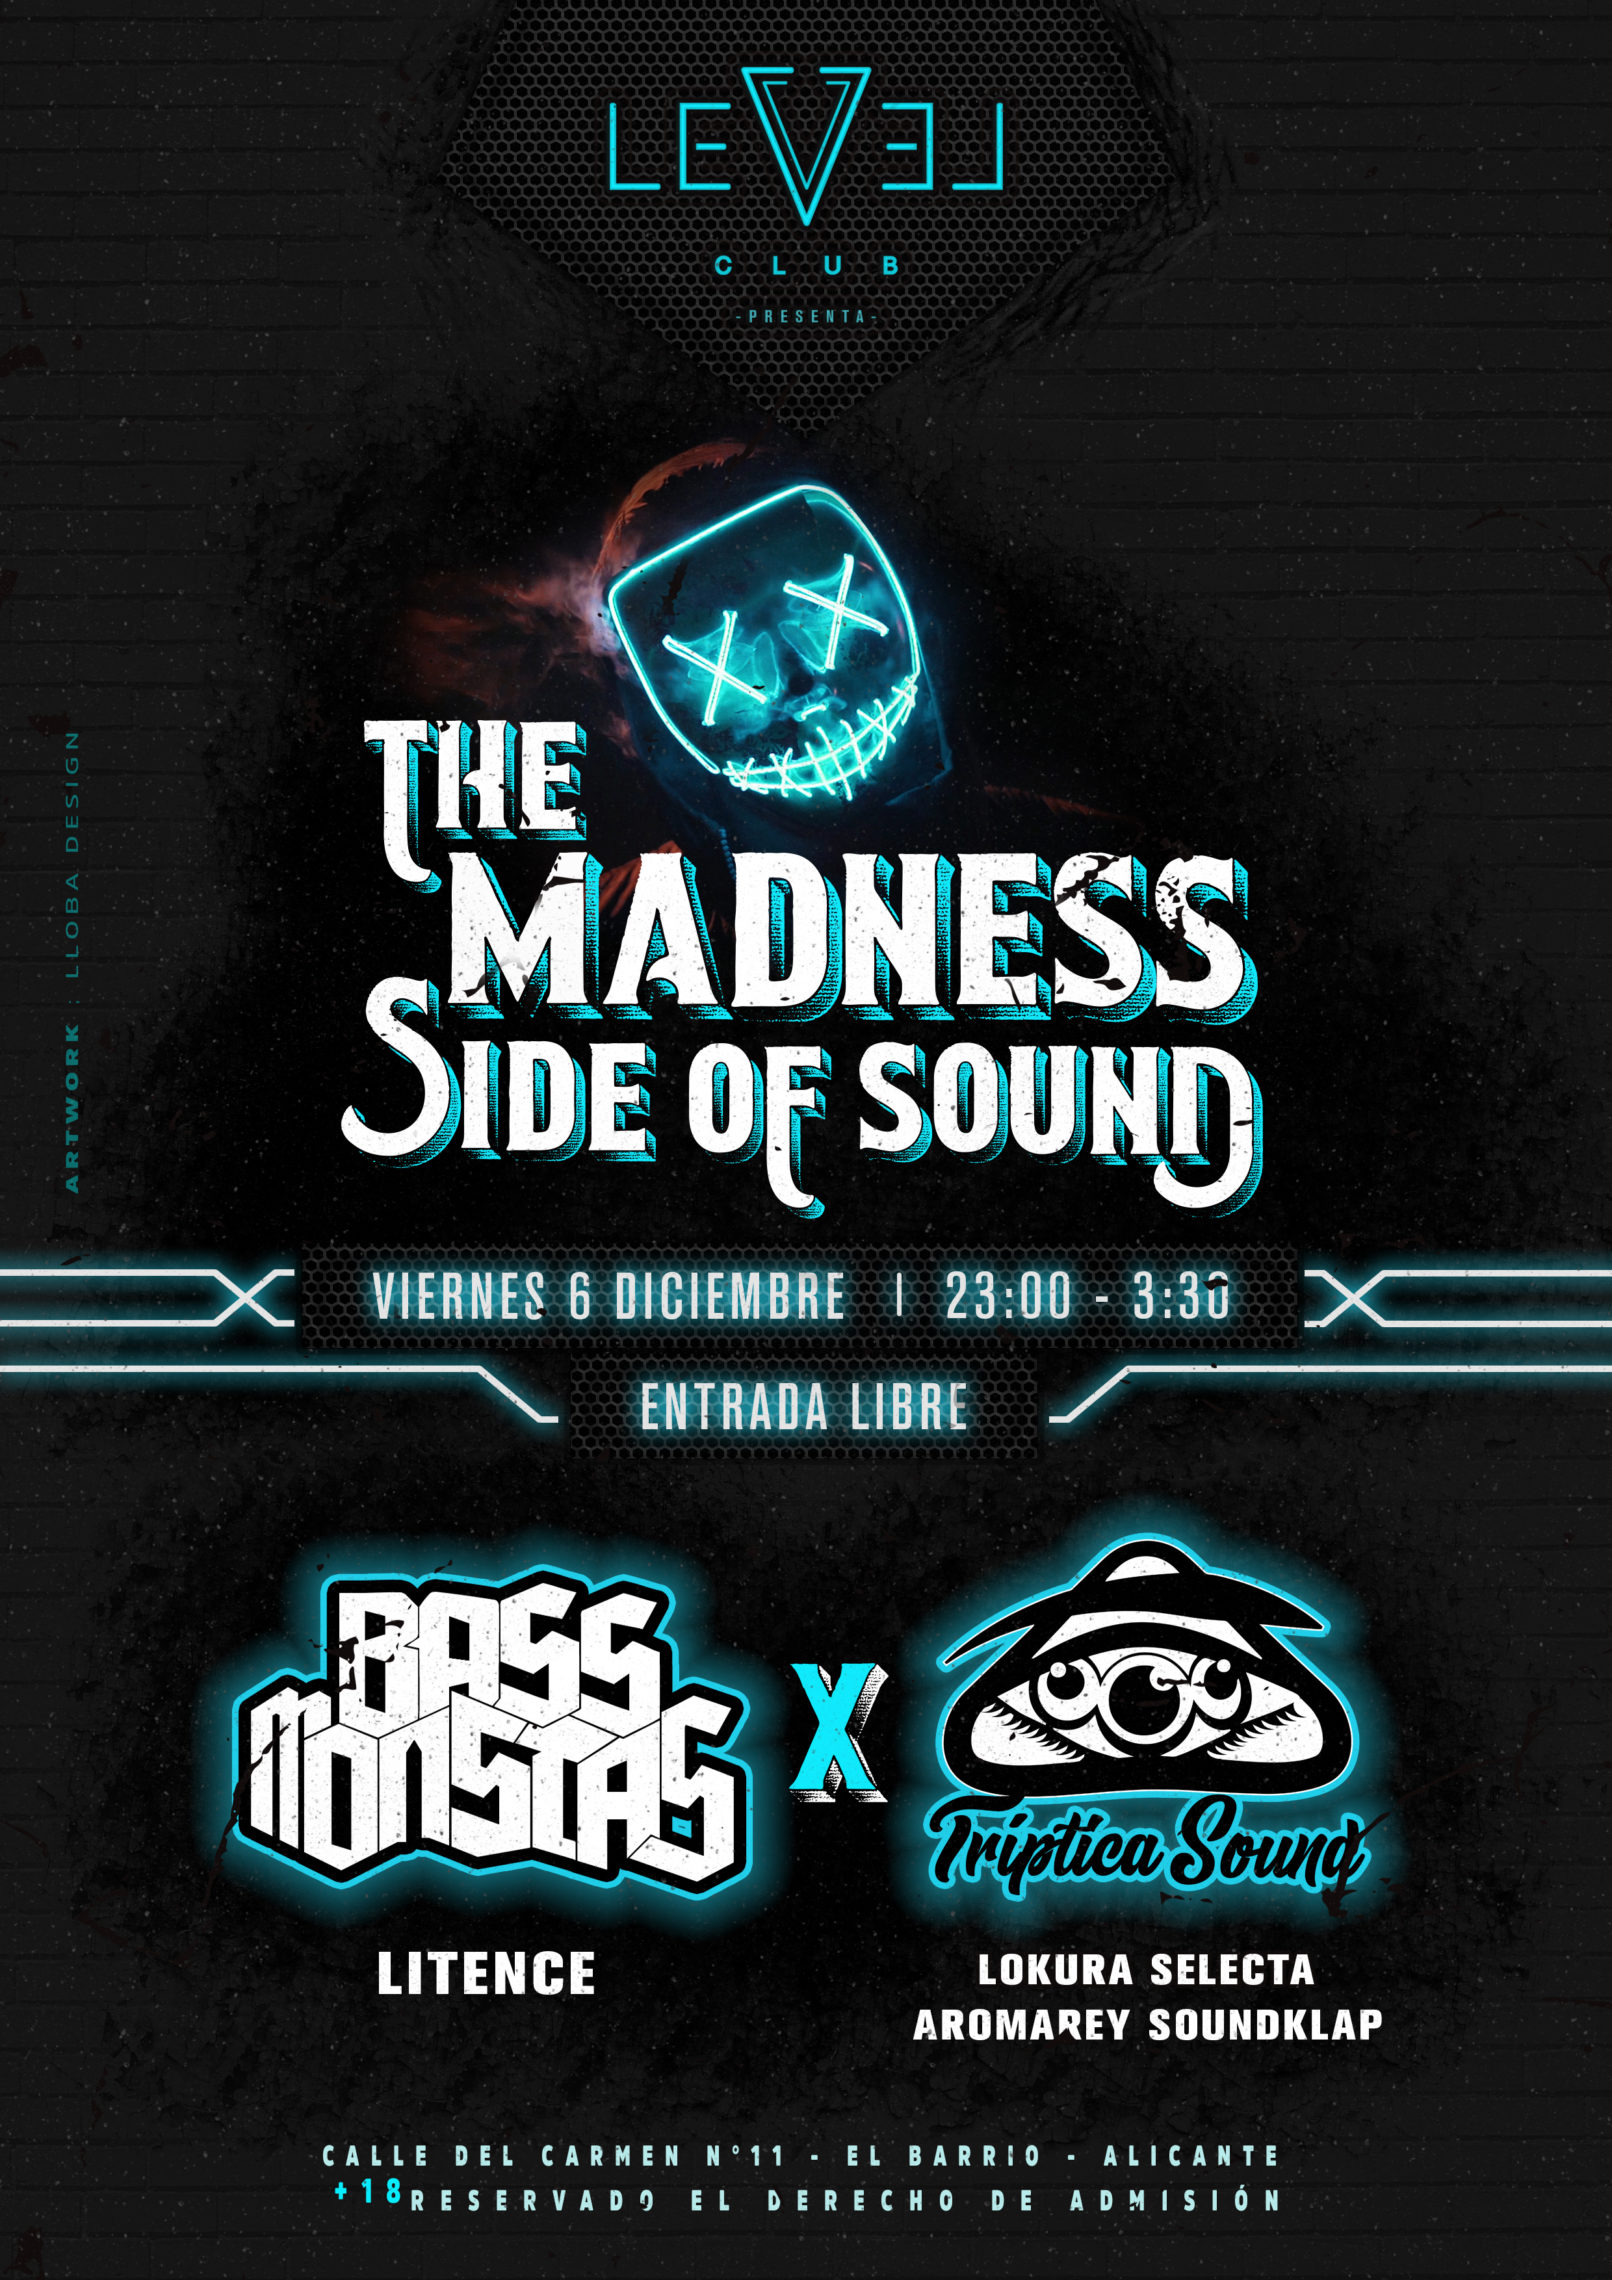 The Madness Side of Sound